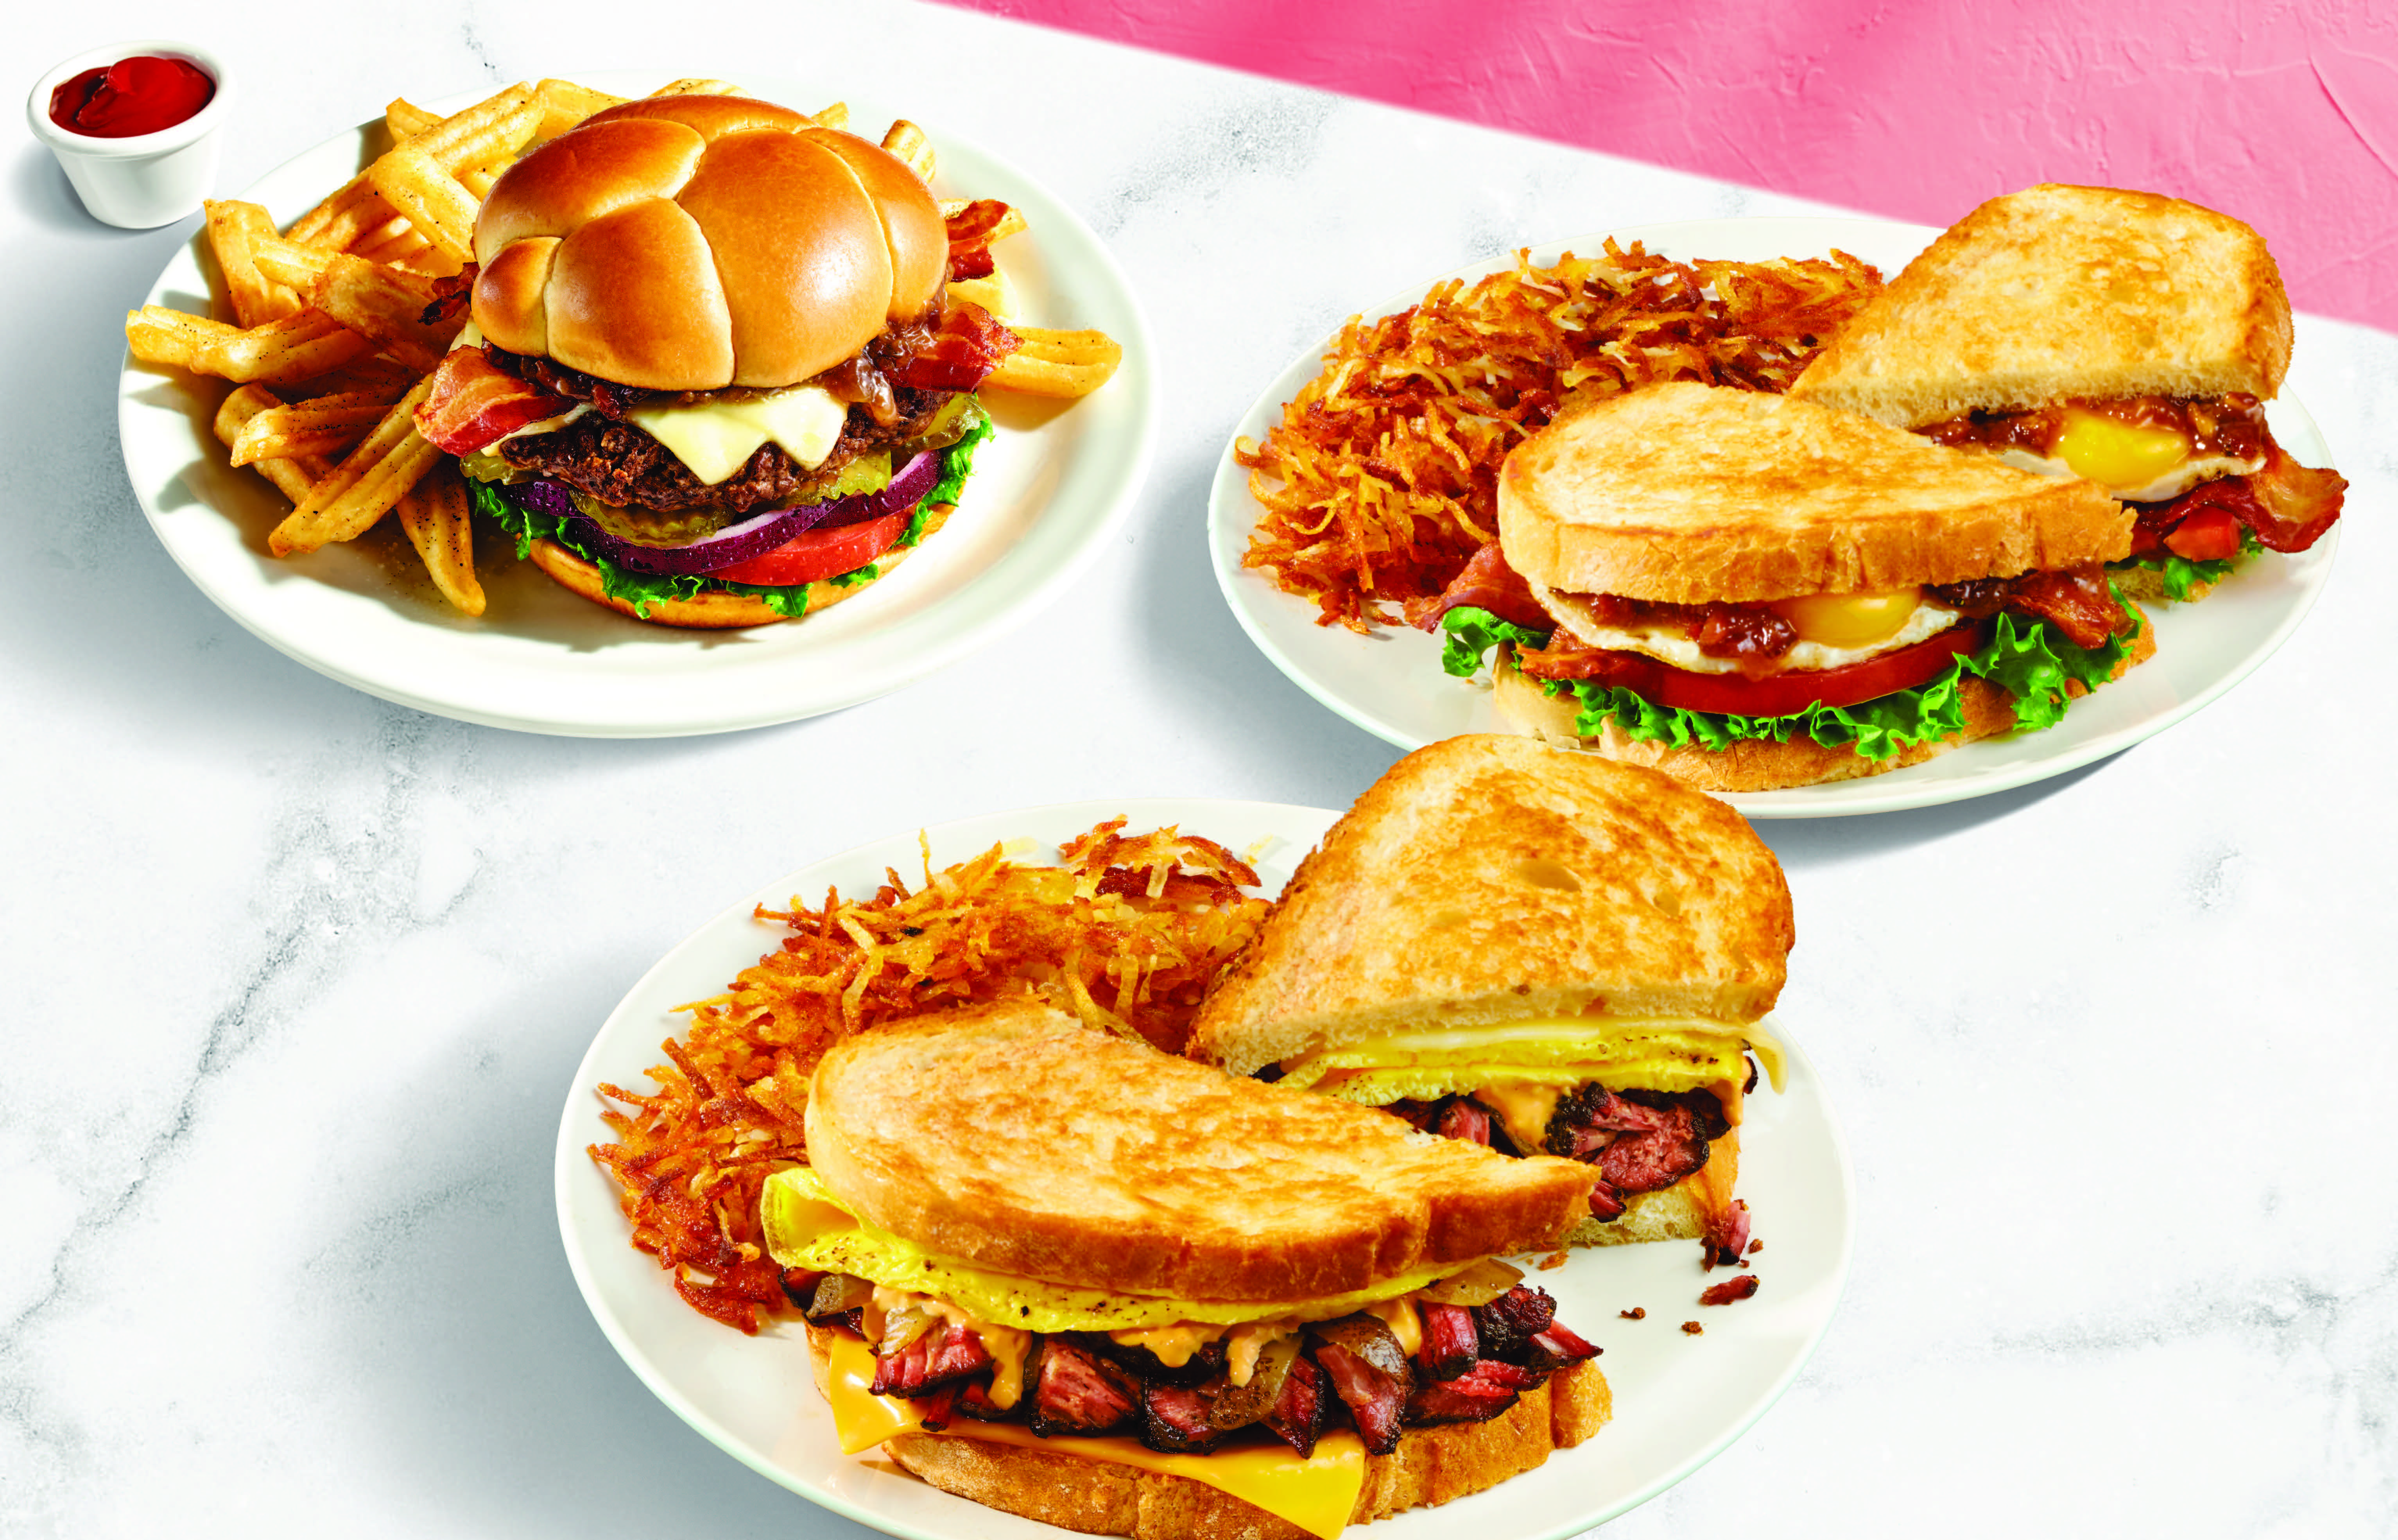 Take a Bite Out of Summer at Denny's with Three New Delicious Sandwiches